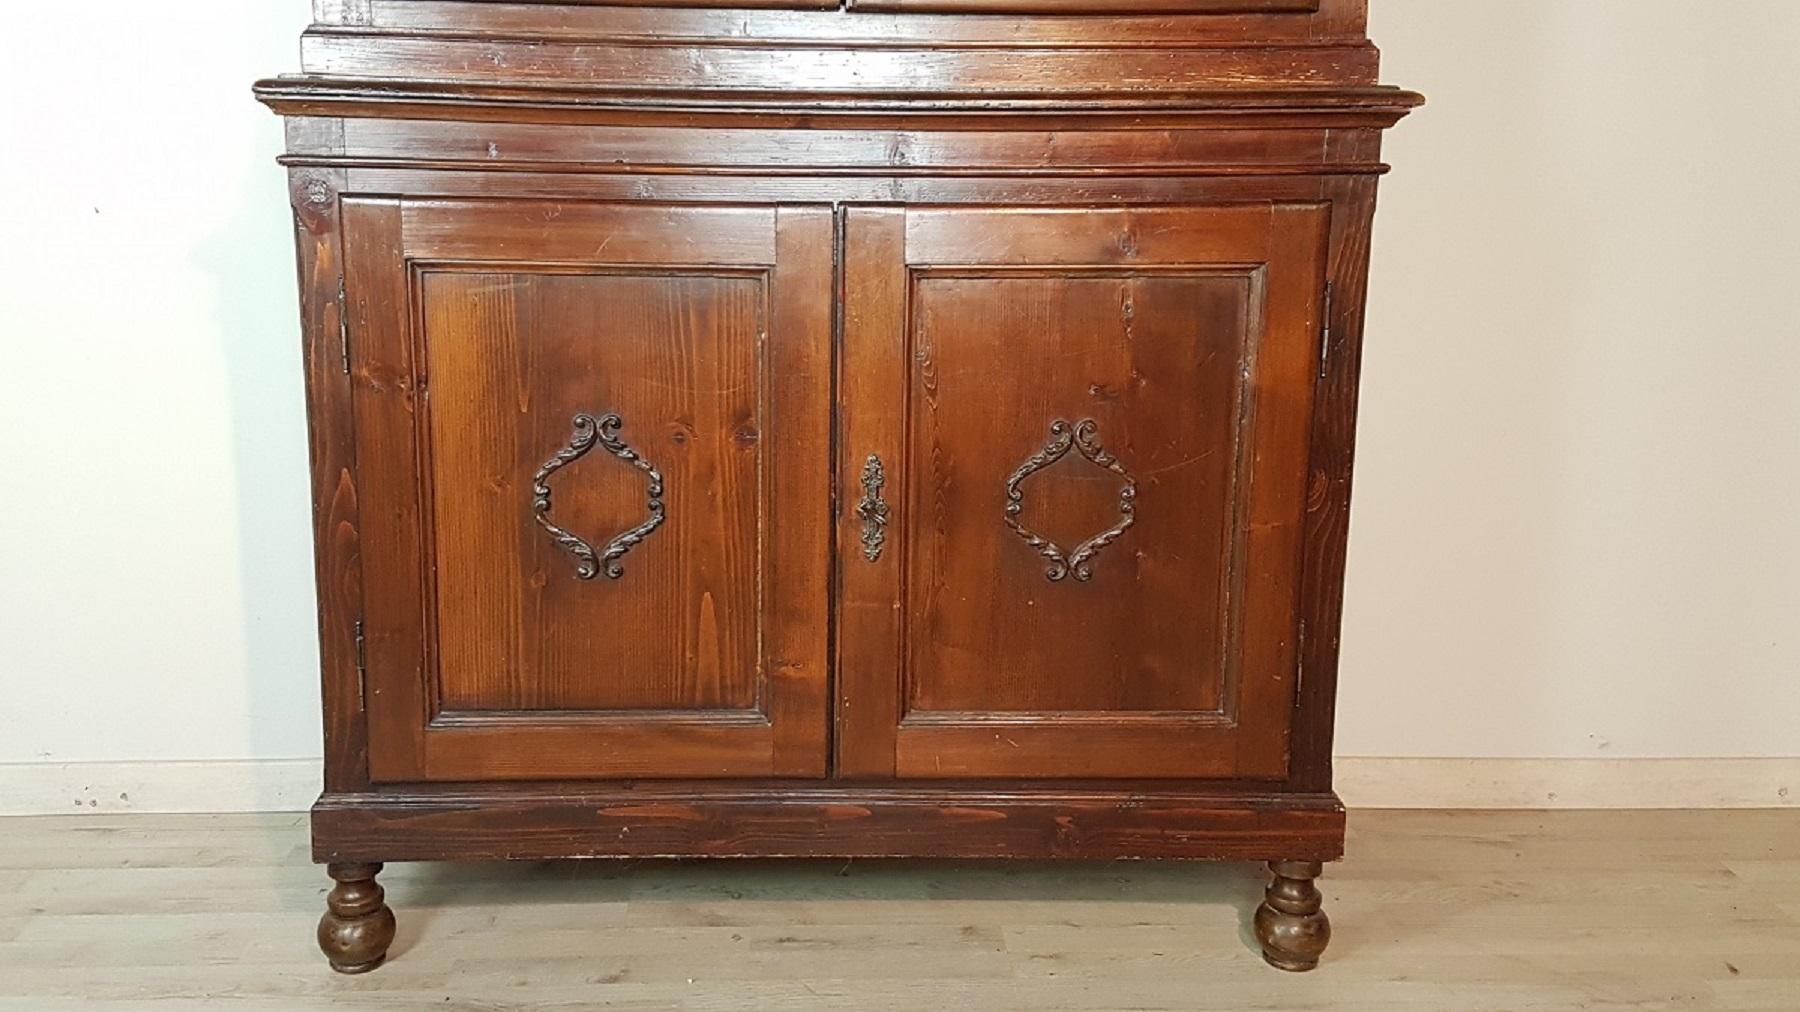 Beautiful particular antique 1880s sideboard in solid fir wood. The onion-shaped feet are still of 19th century taste as well as the decoration in the upper part in carved wood. The use of fir wood gives it a rustic look ideal to be placed in